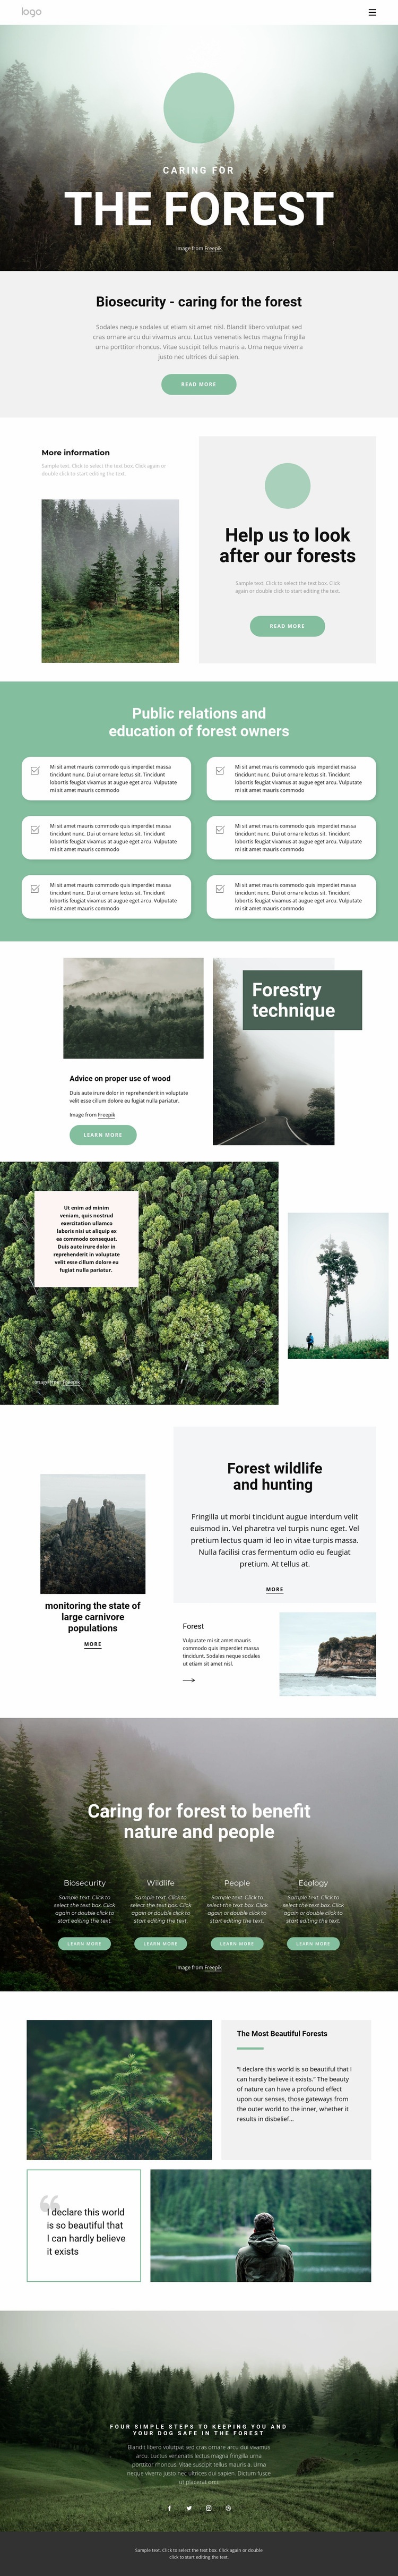 Caring for parks and forests Homepage Design